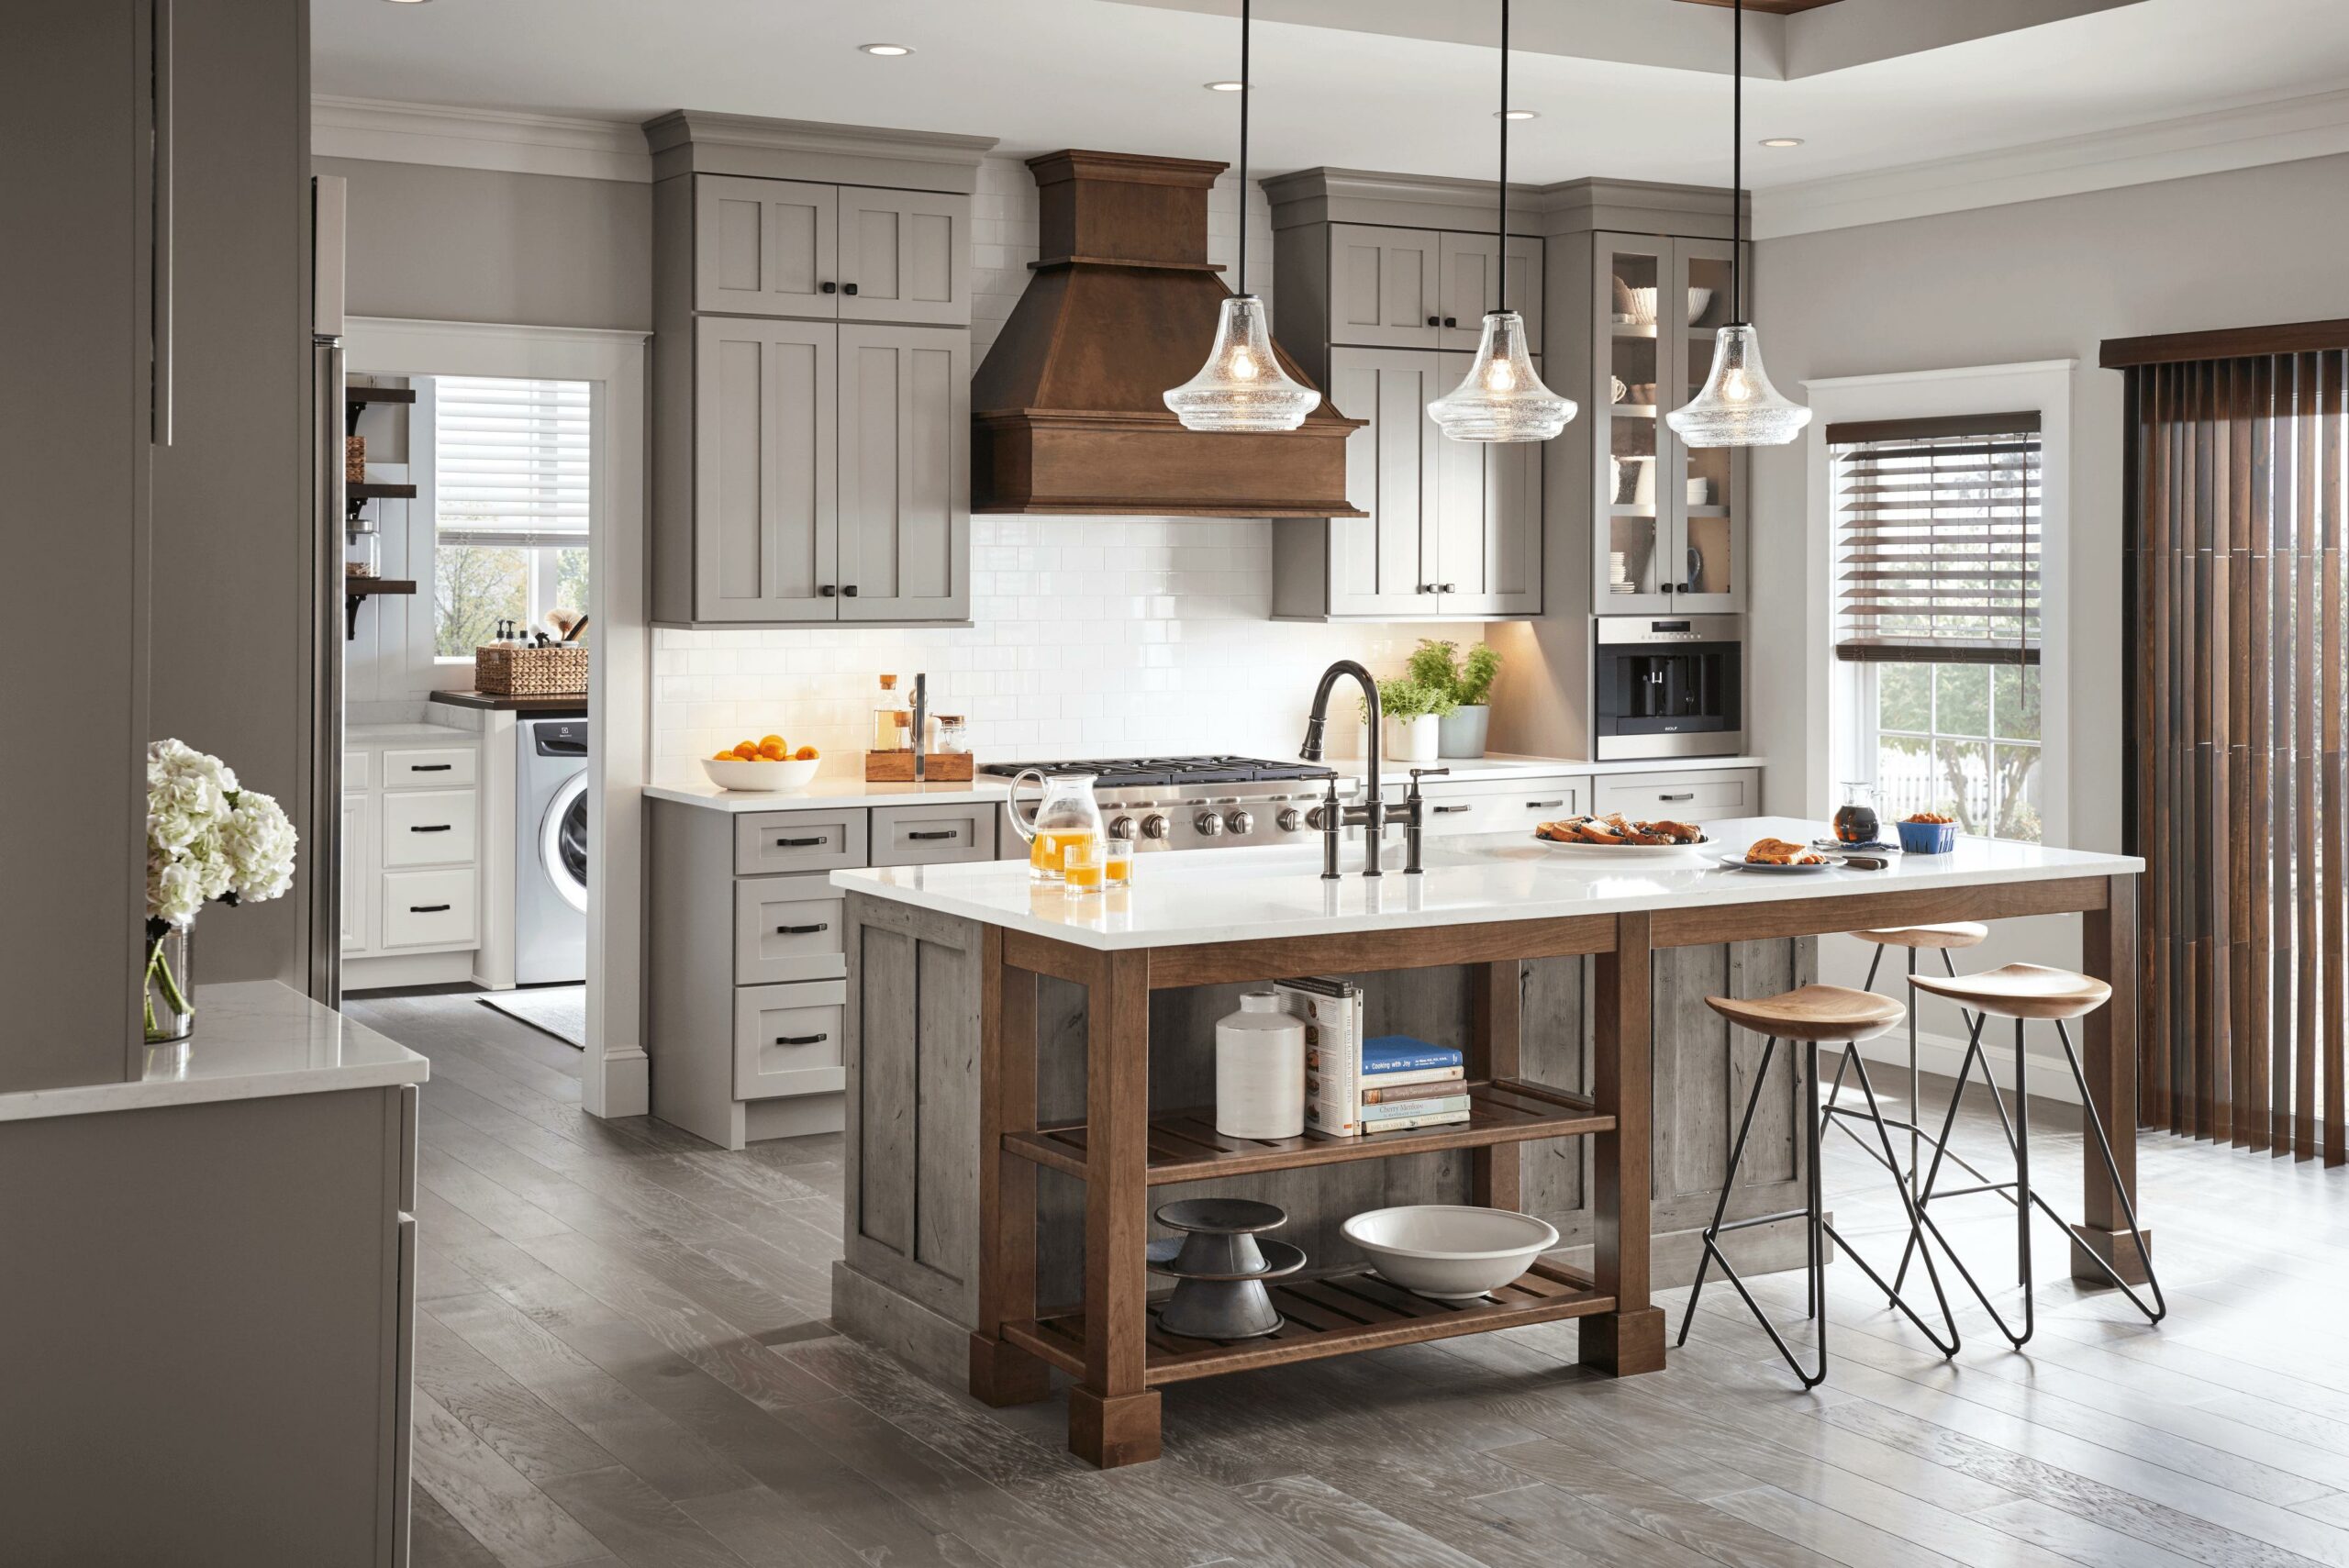 Products - Kona Cabinetry